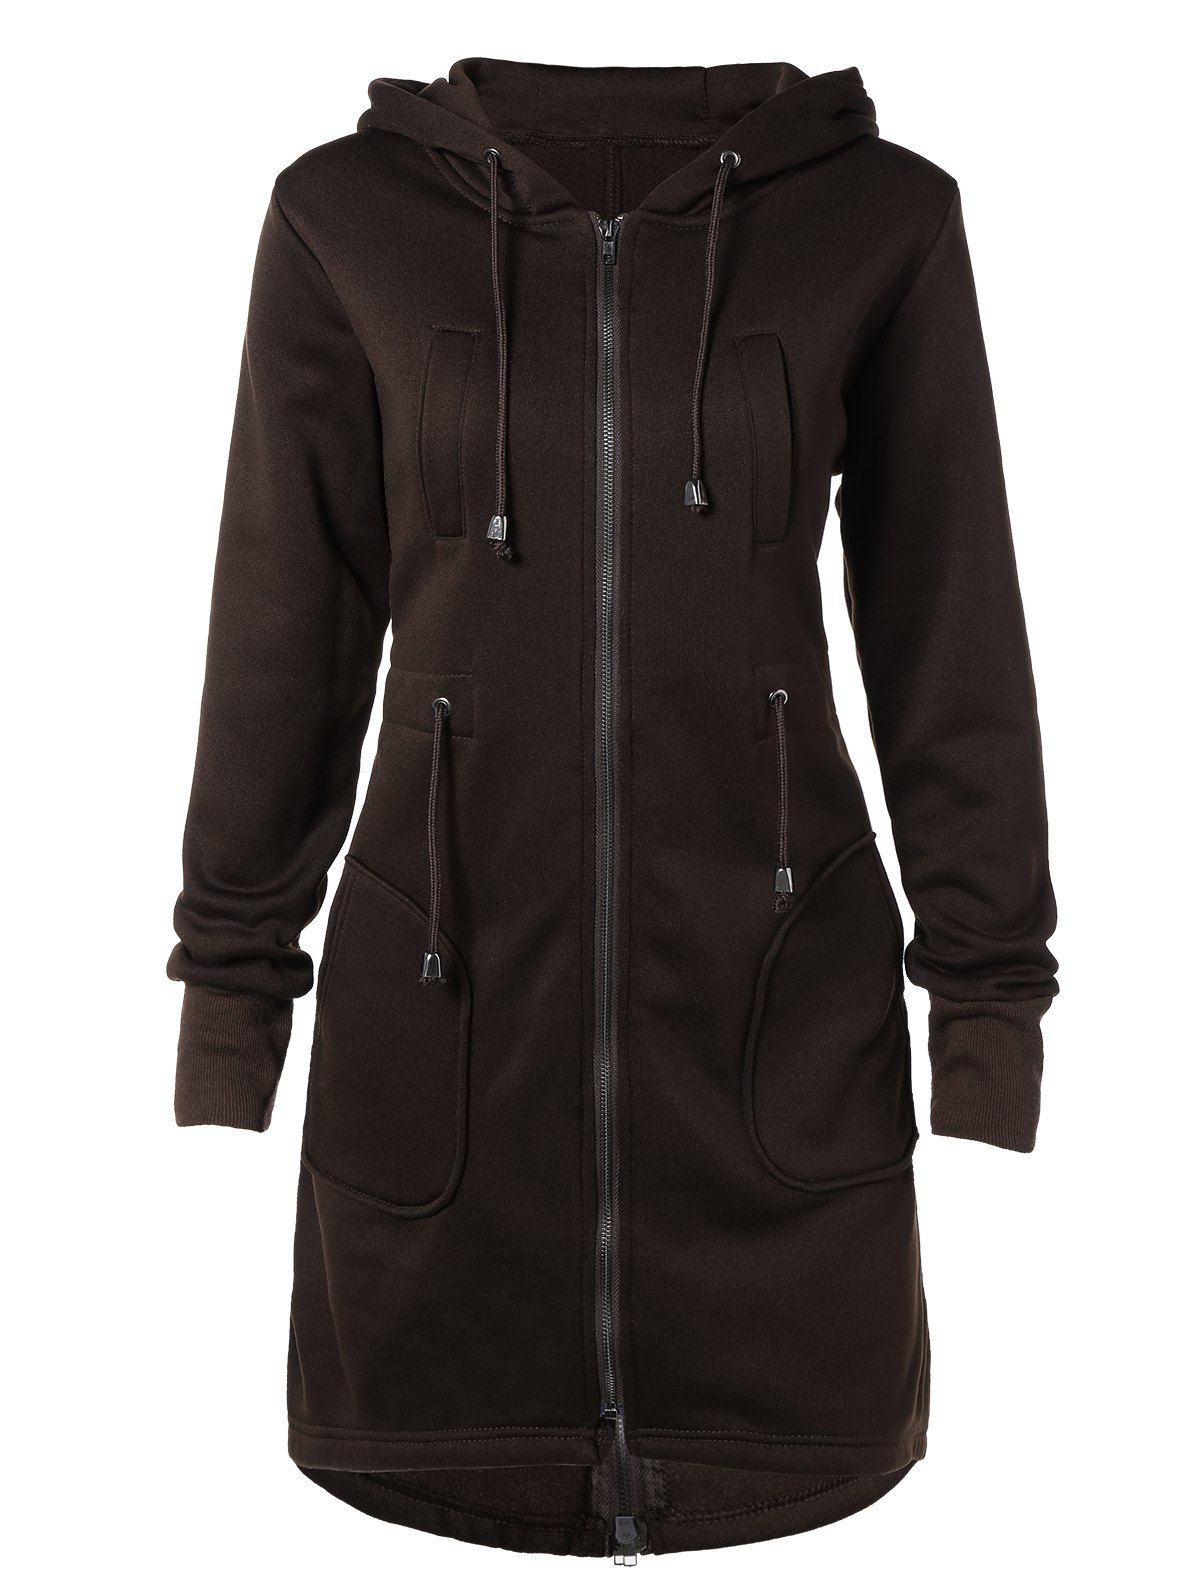 [43% OFF] Drawstring Hooded Coat With Pockets | Rosegal